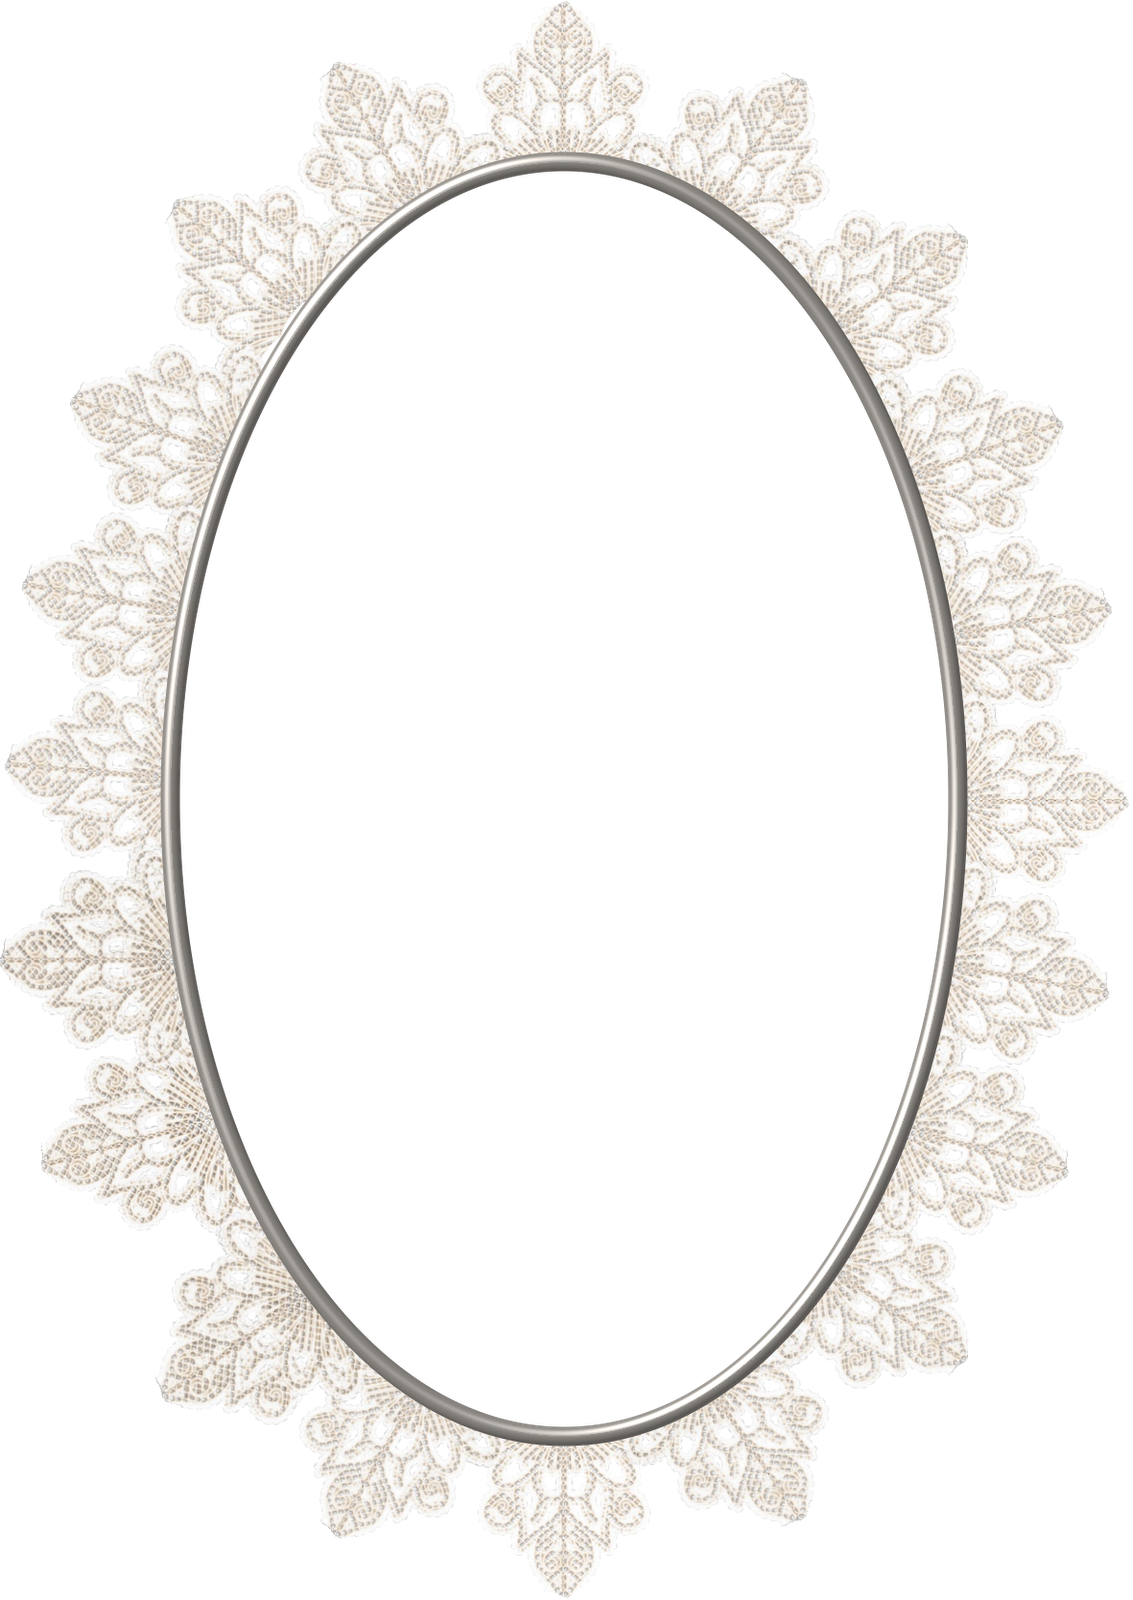 A White Oval Frame With Lace Trim